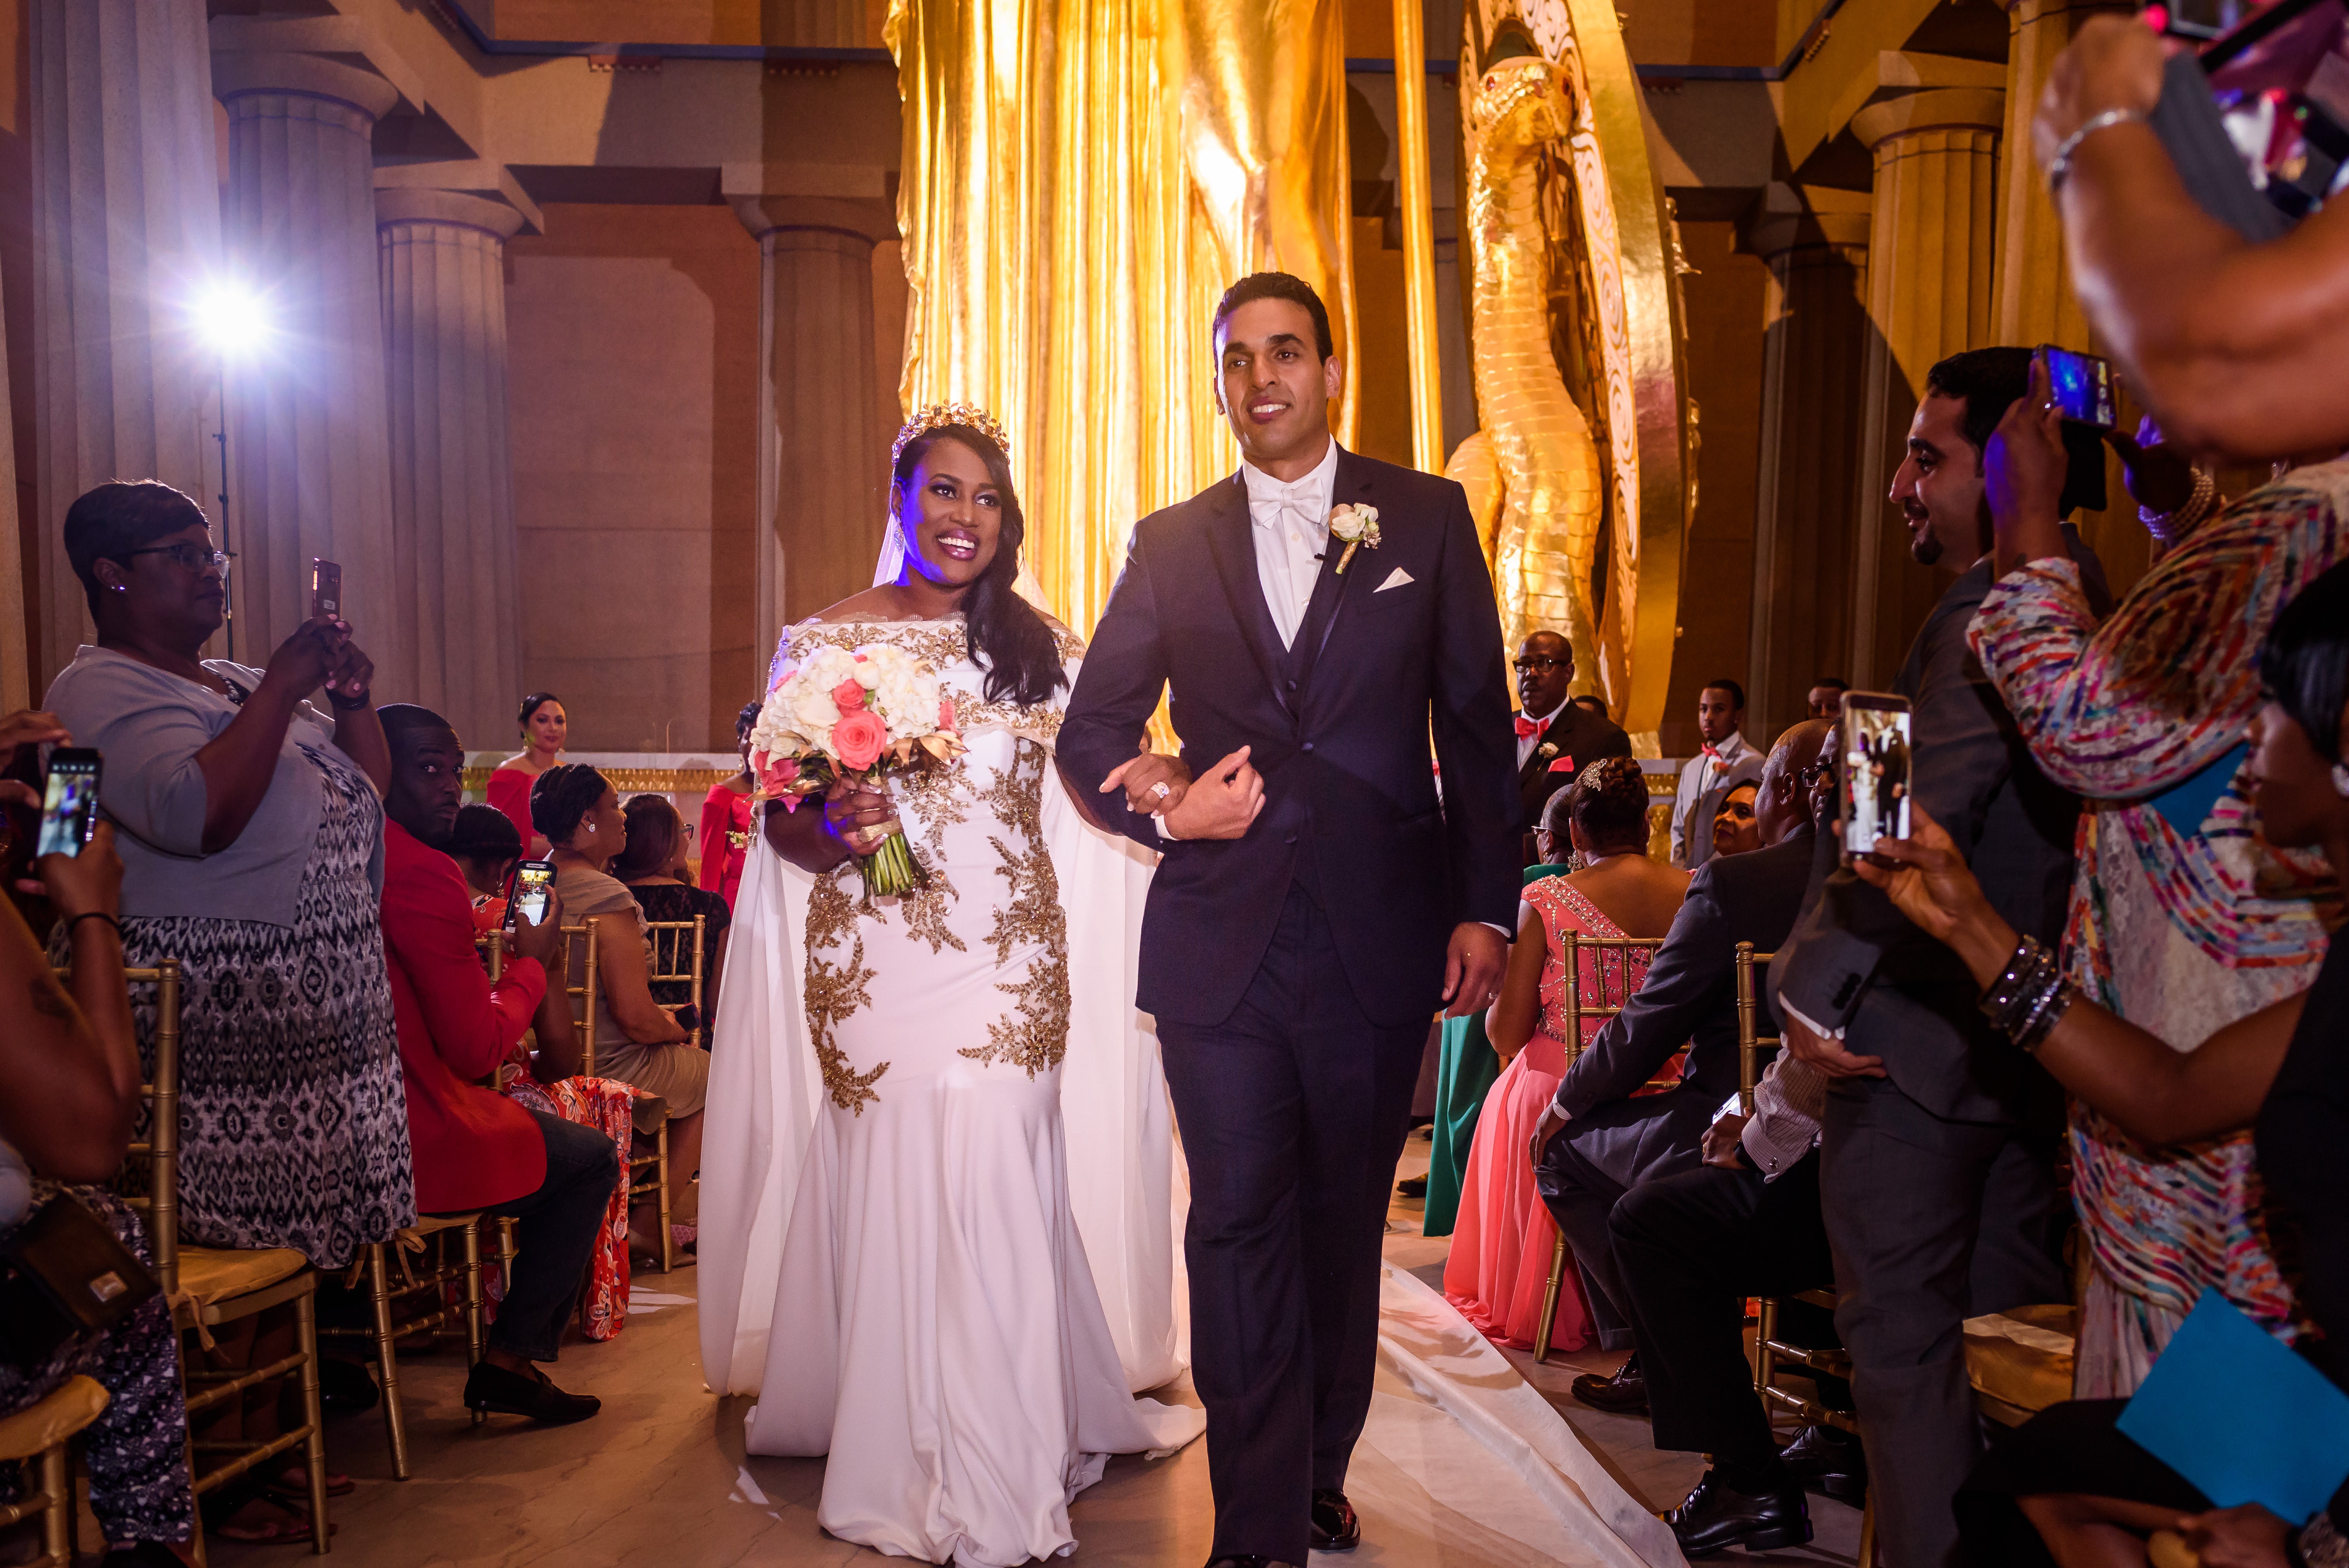 Bridal Bliss: Amine and Michaela Mixed Cultures to Create Wedding Magic In Nashville